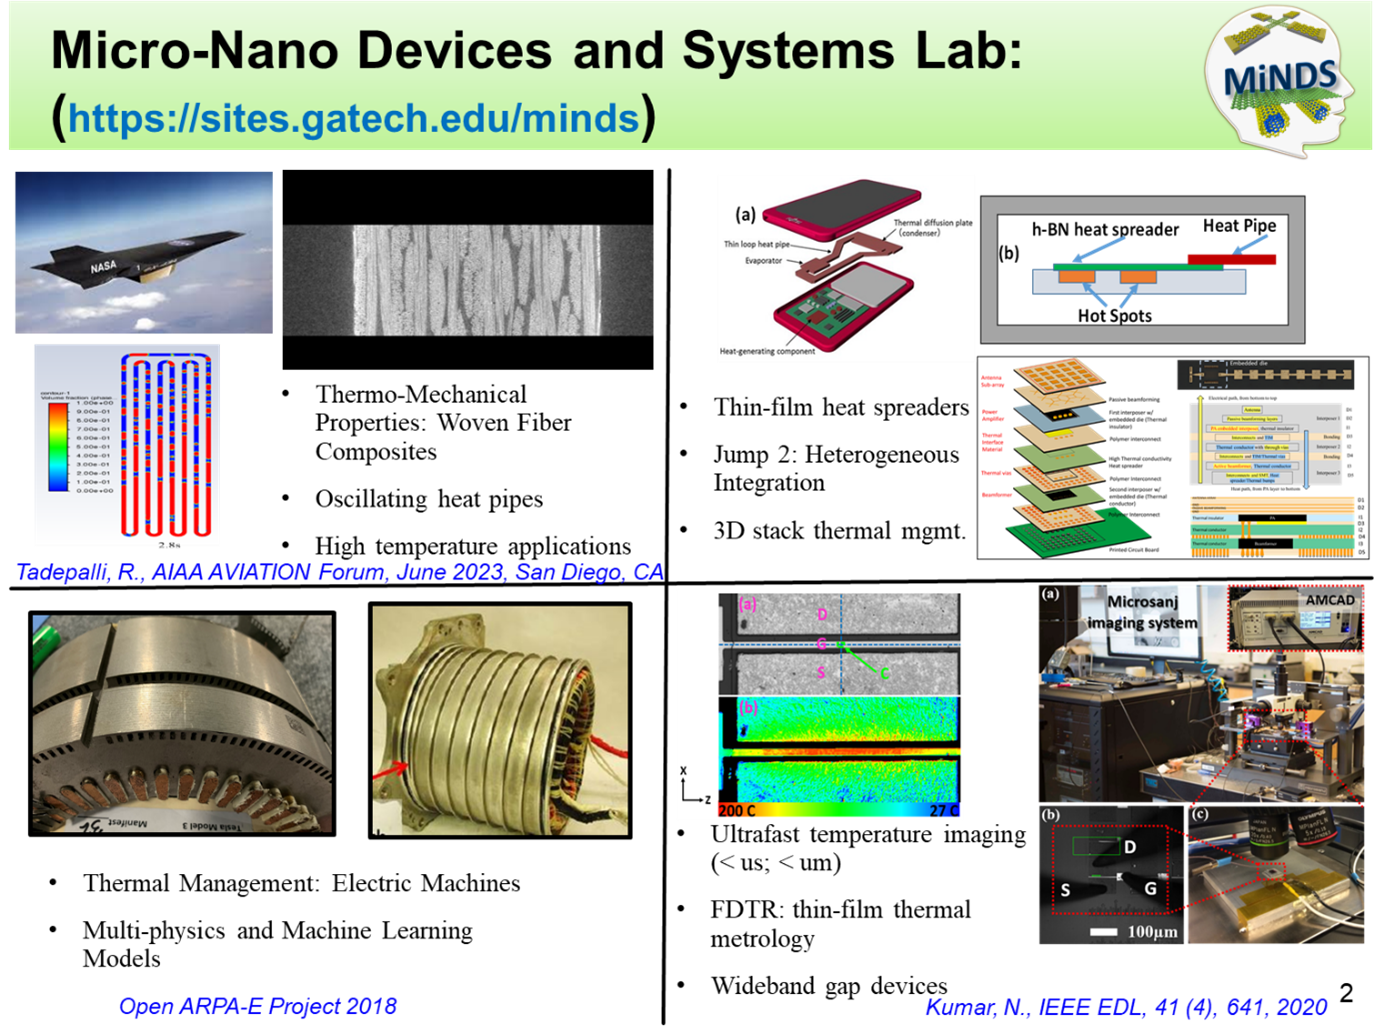 Micro-Nano Devices and Systems Lab